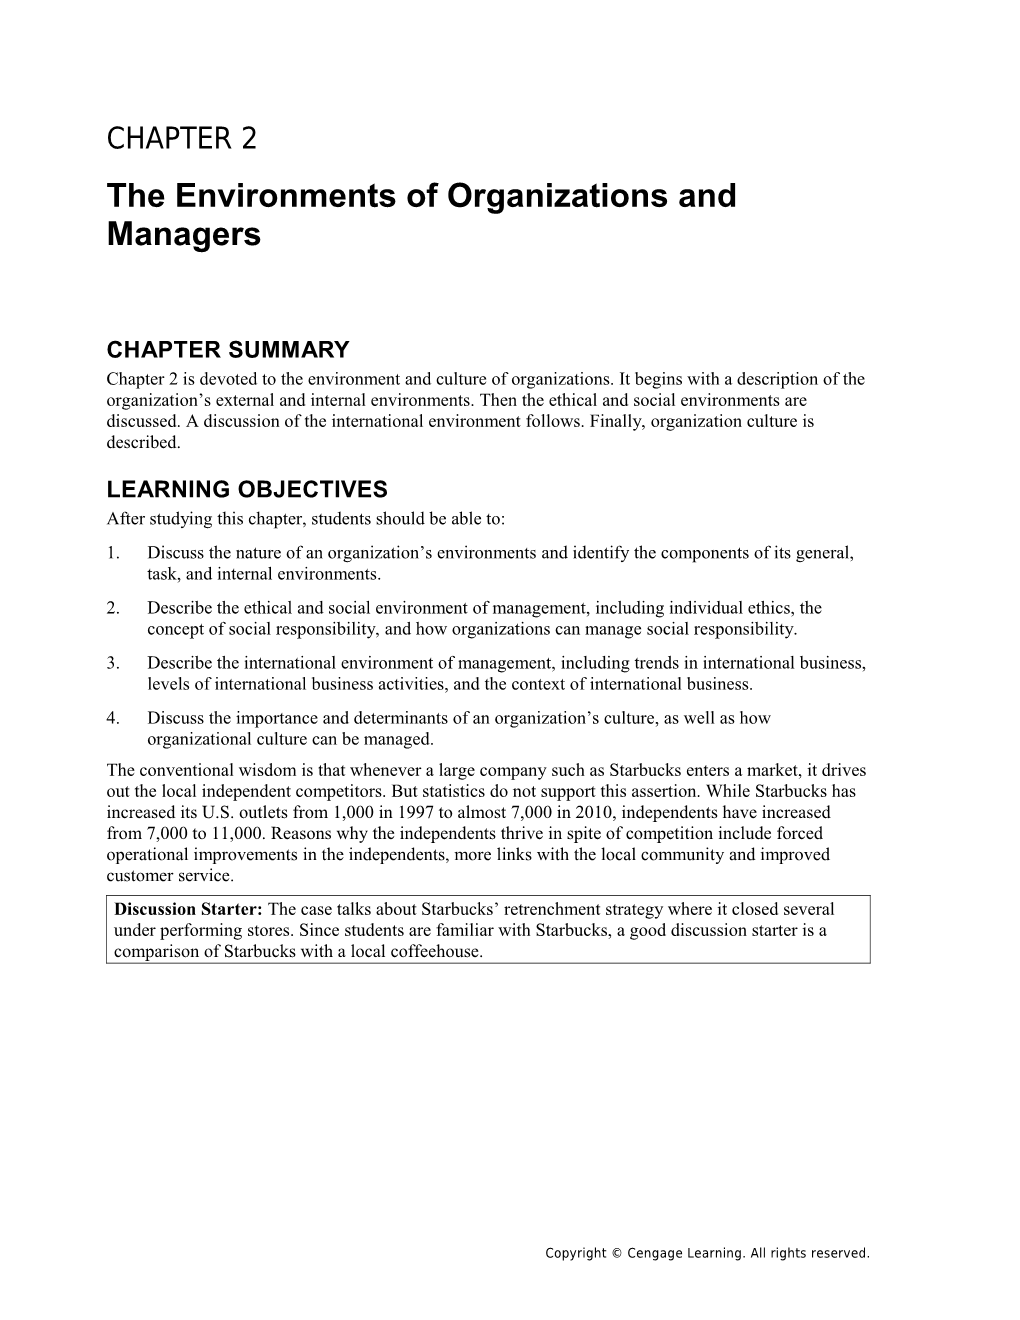 The Environments of Organizations and Managers